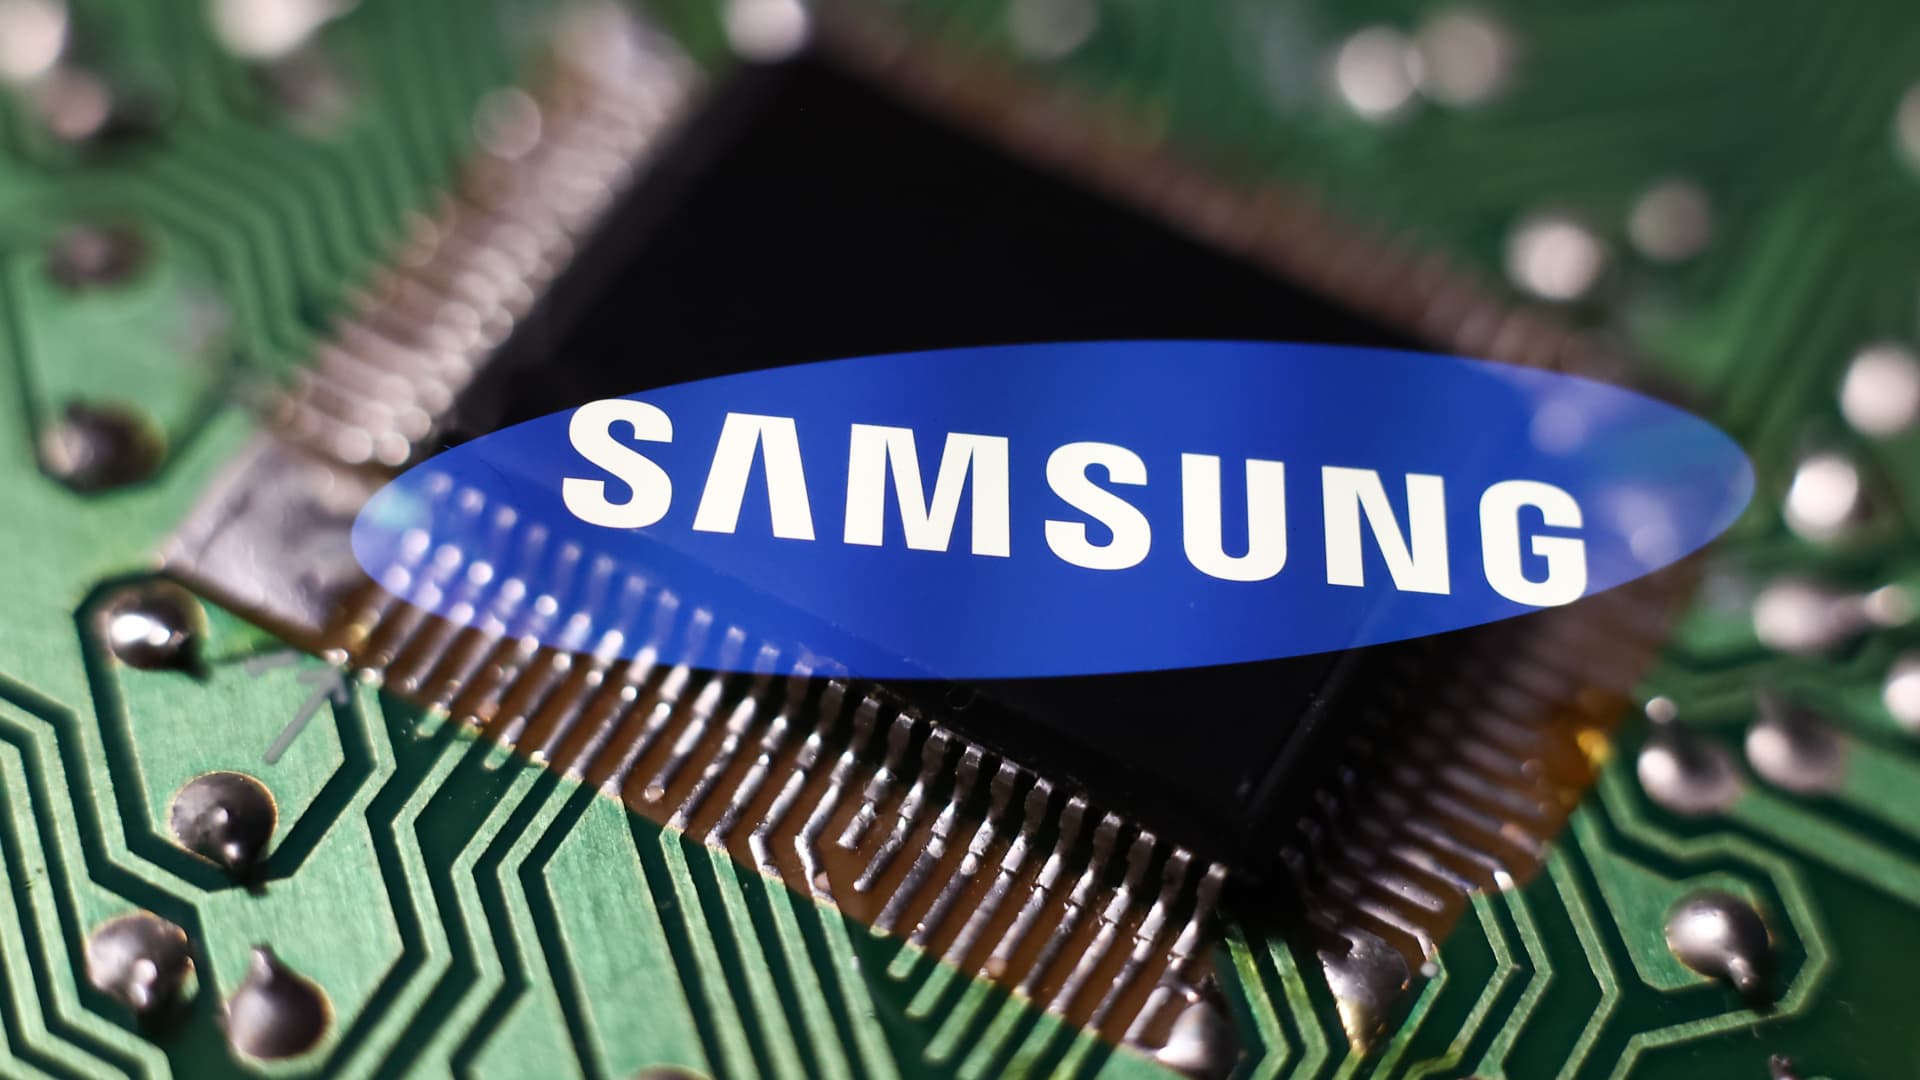 Samsung to begin making world’s most advanced mobile chips in 2025 as battle with TSMC heats up